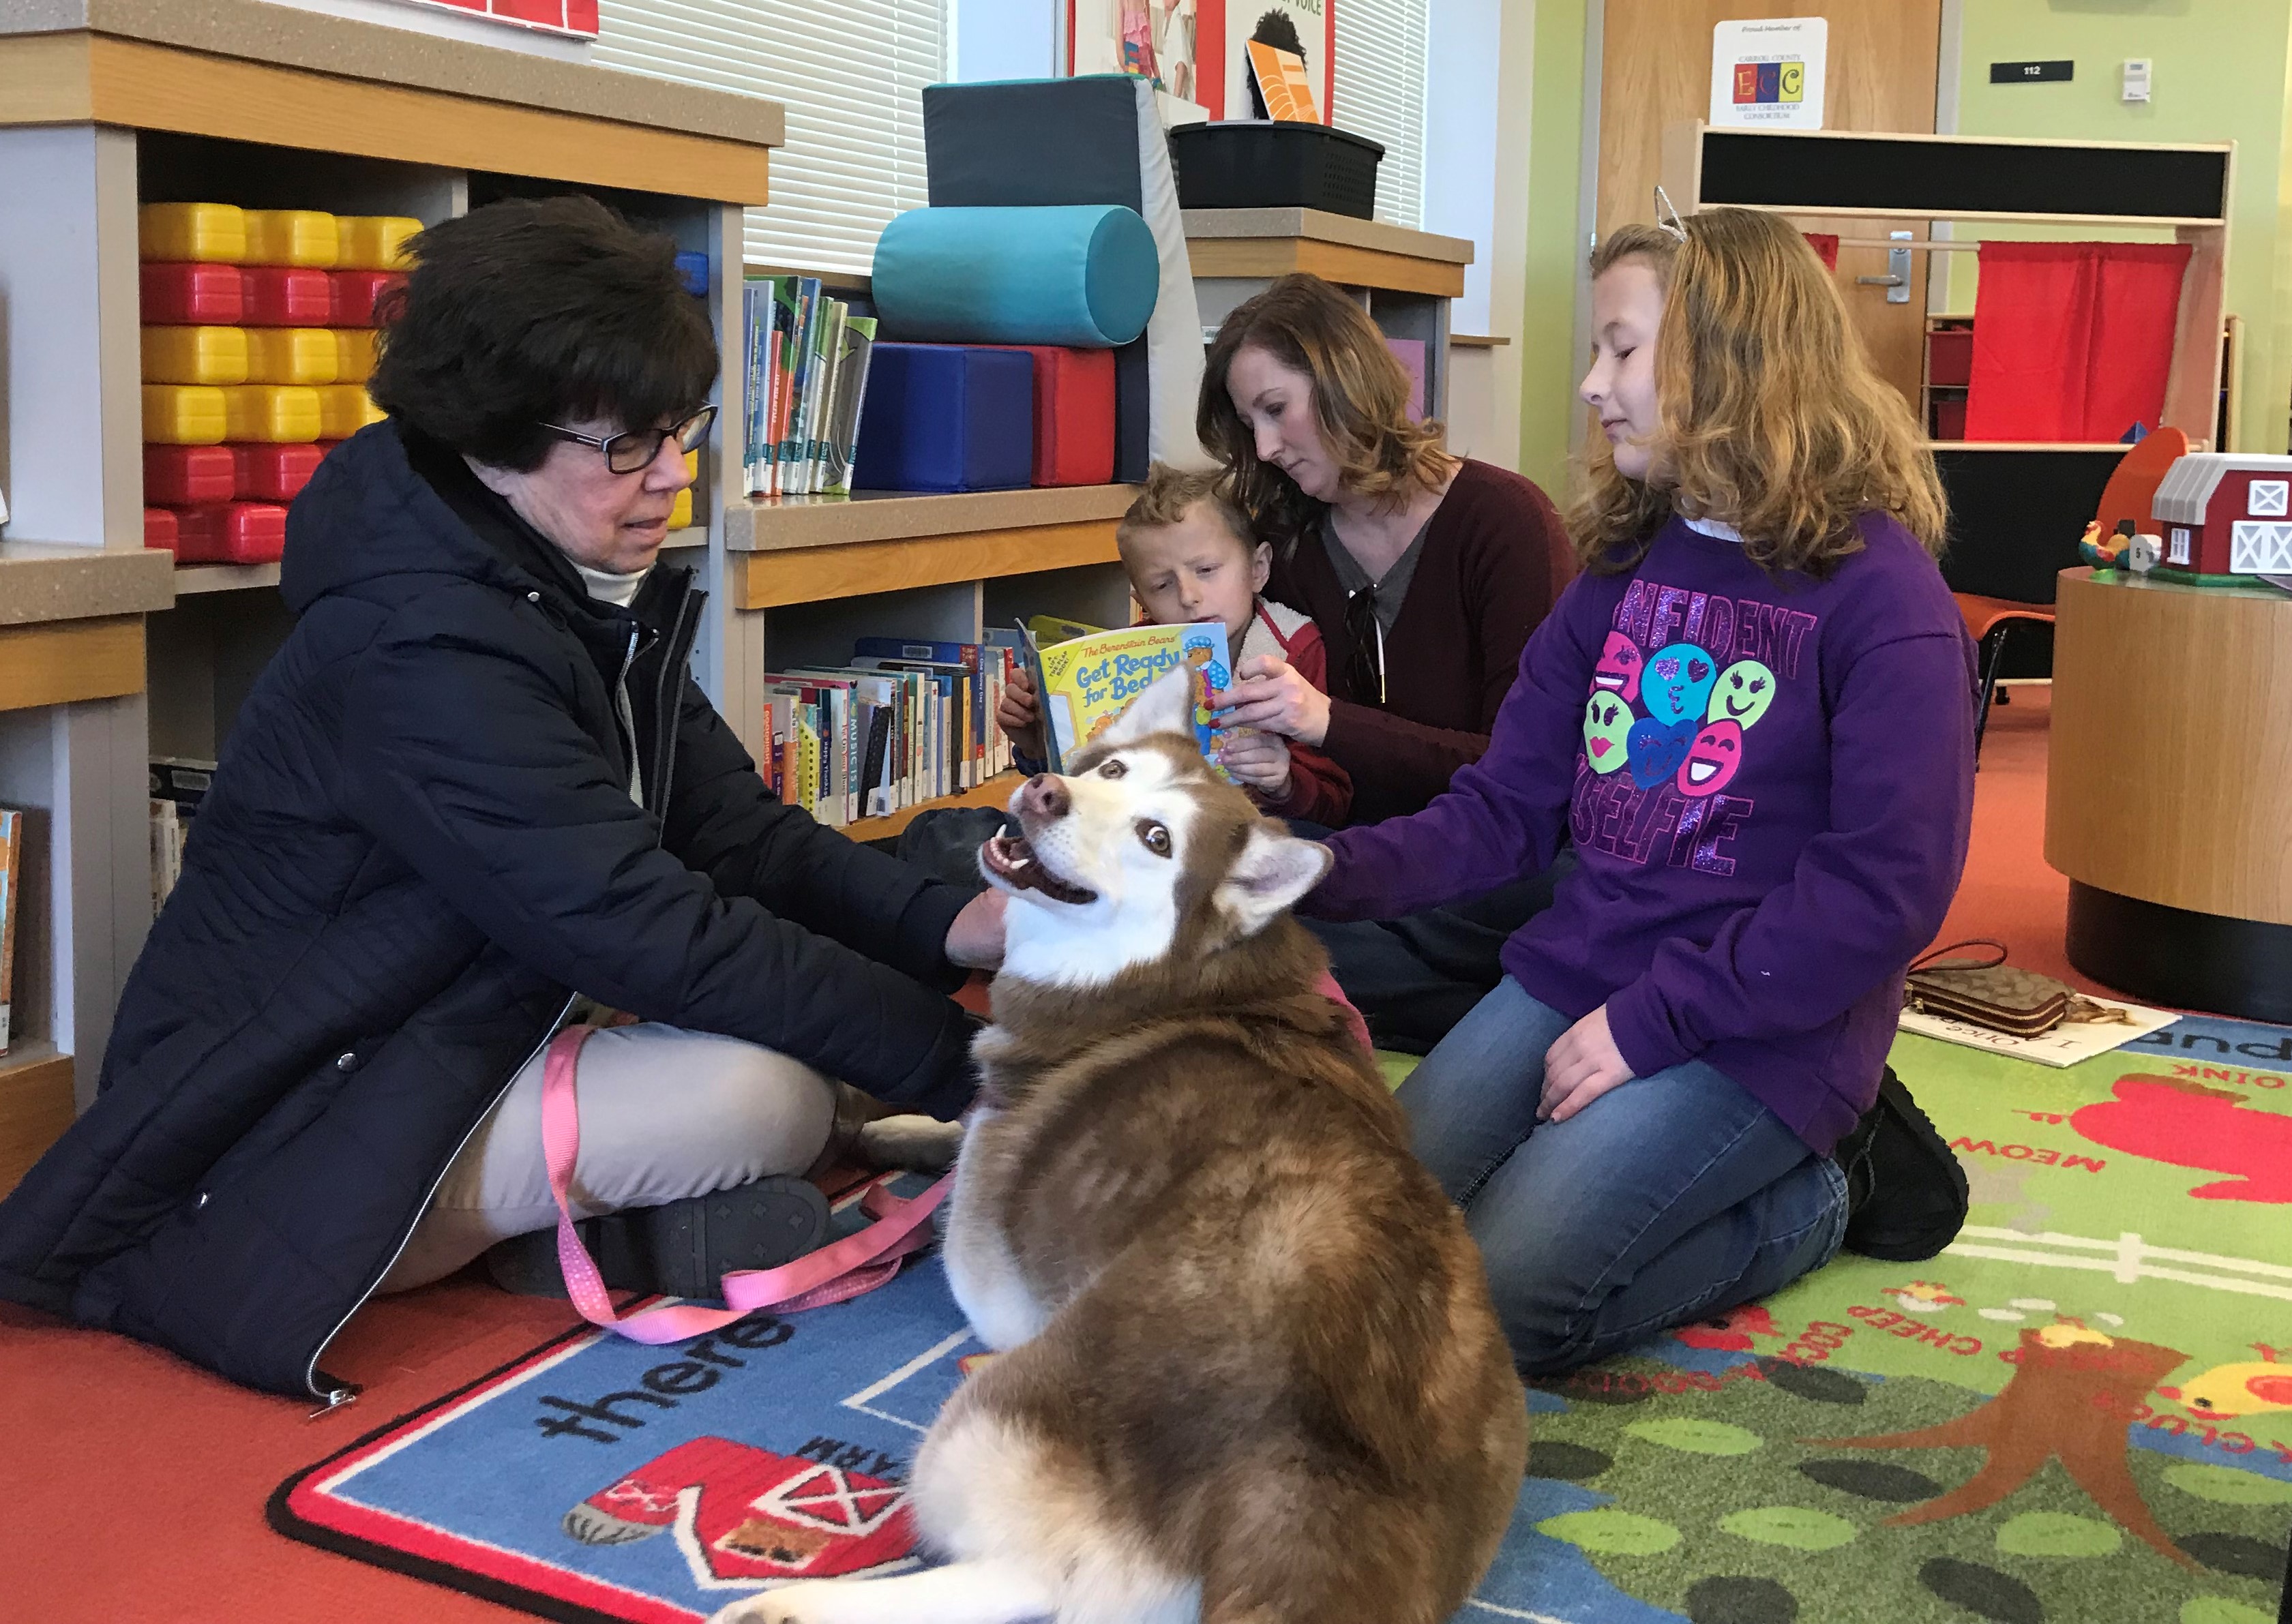 A boy reads to a dog at the library while his mom and sister listen